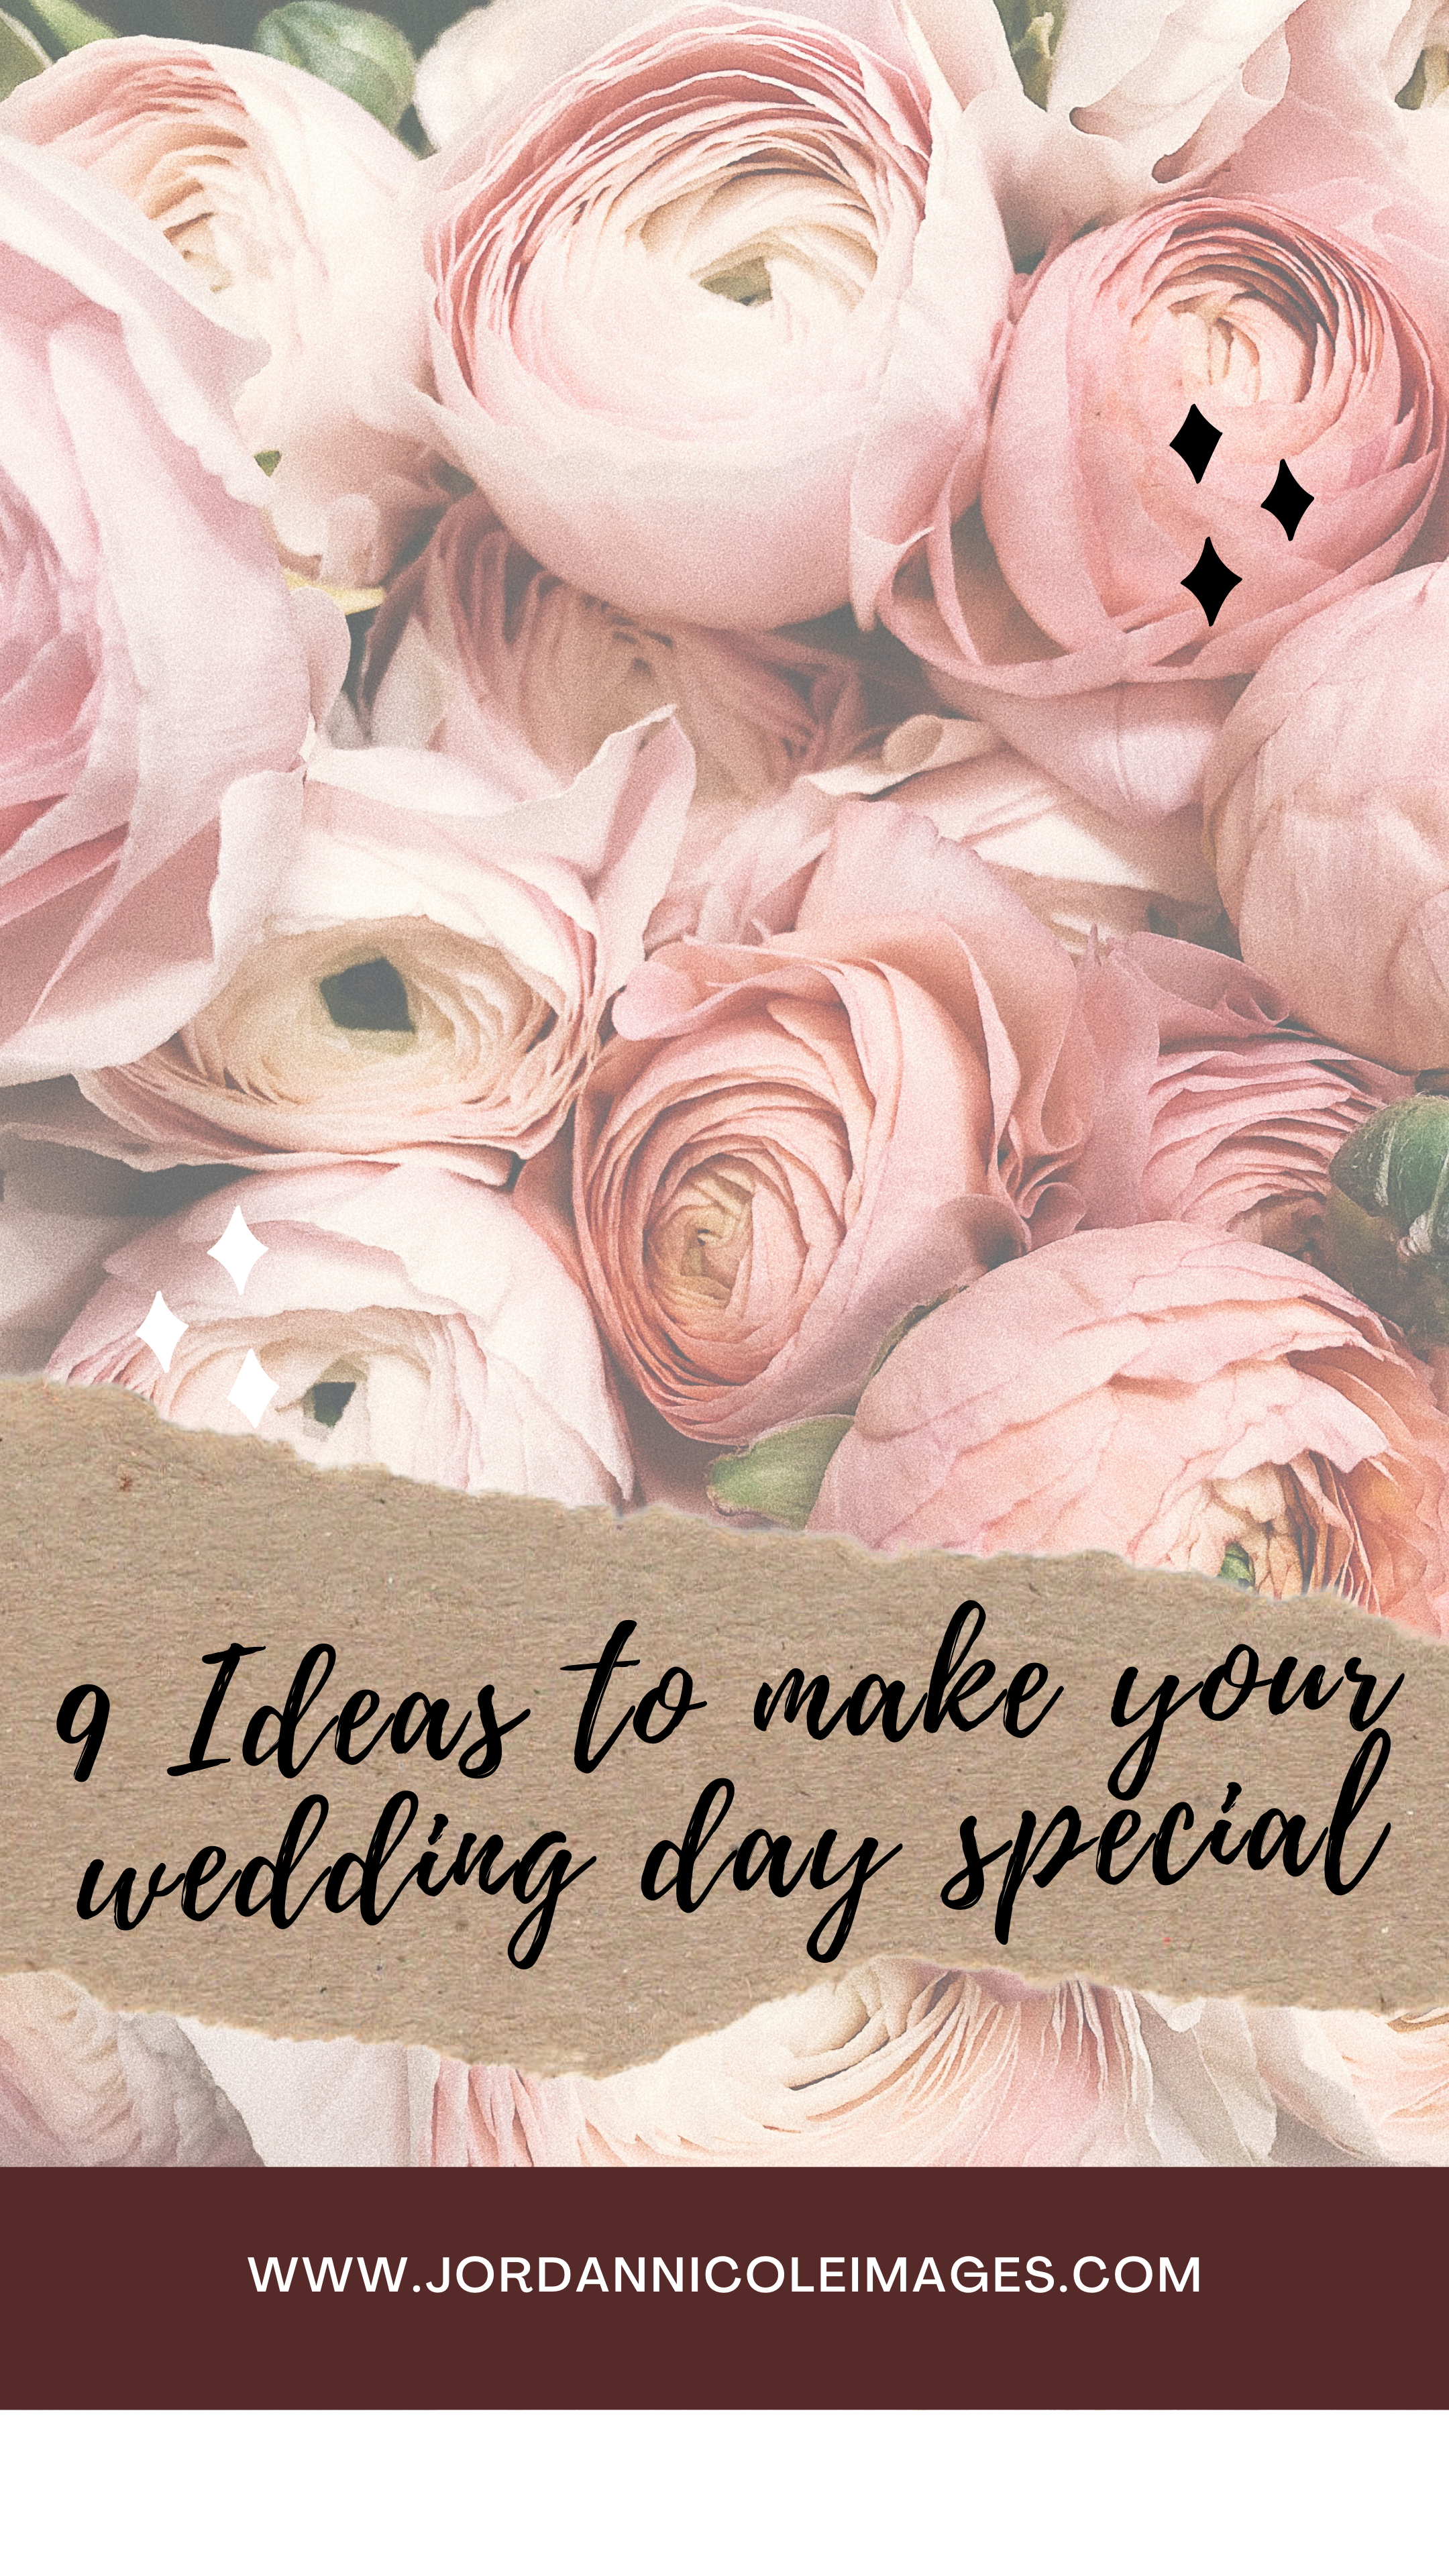 9 ideas to make your wedding day special